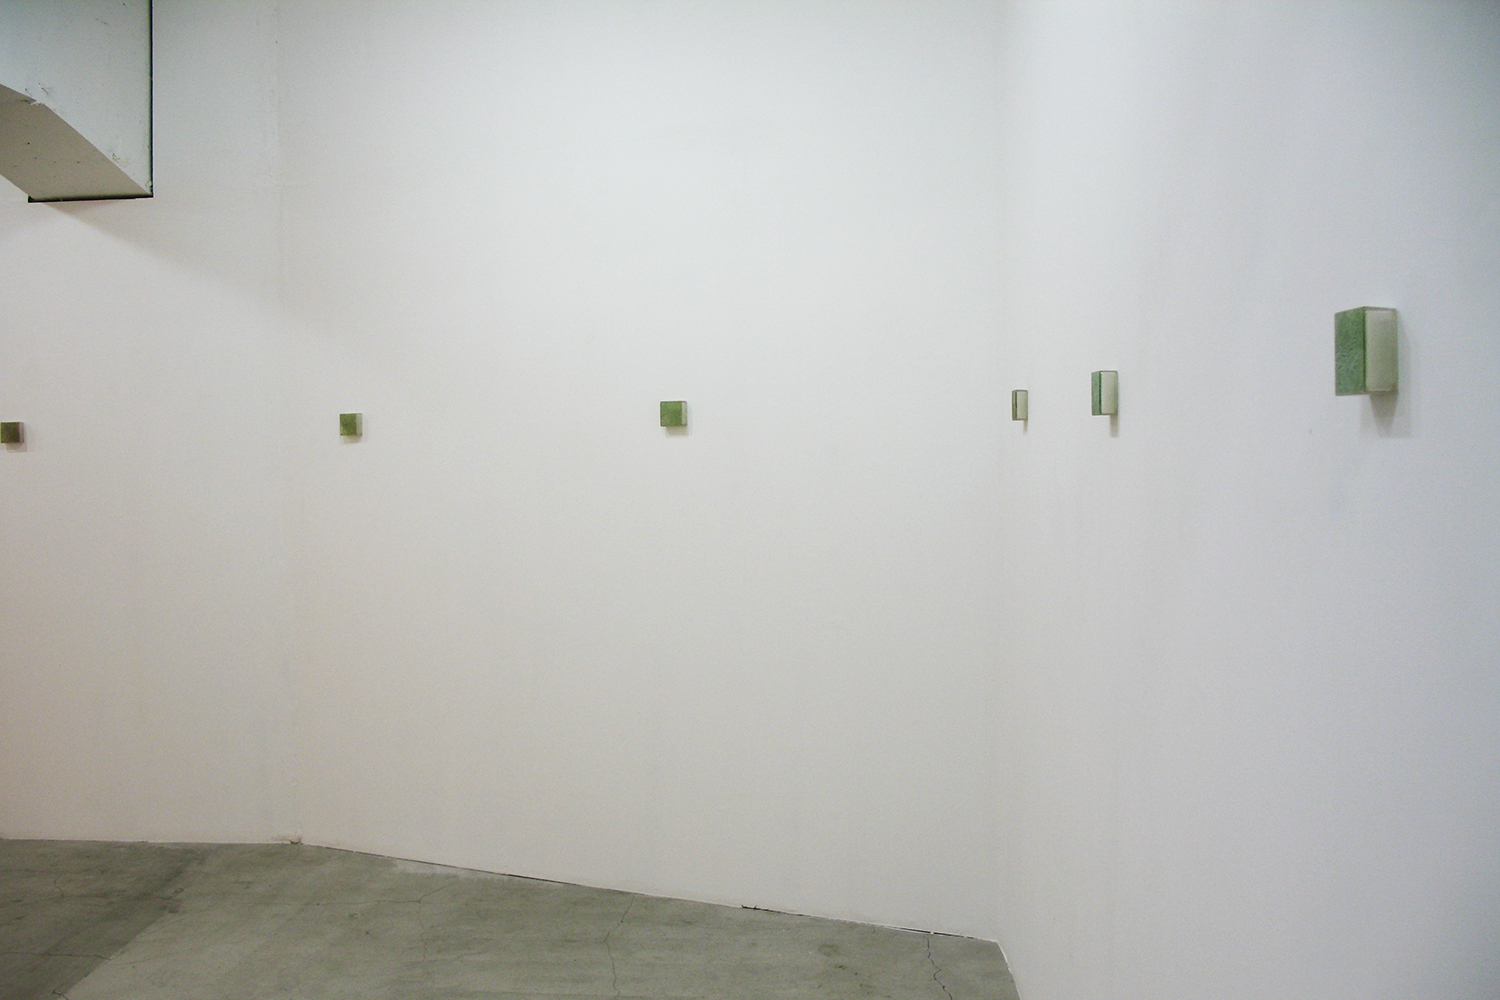 Installation view<br>Photo-painting 草上のかおり｜Scent on the grass - series｜7.5 x 7.5 x 3 cm｜Oil on FRP, mixed media｜ 2009 each